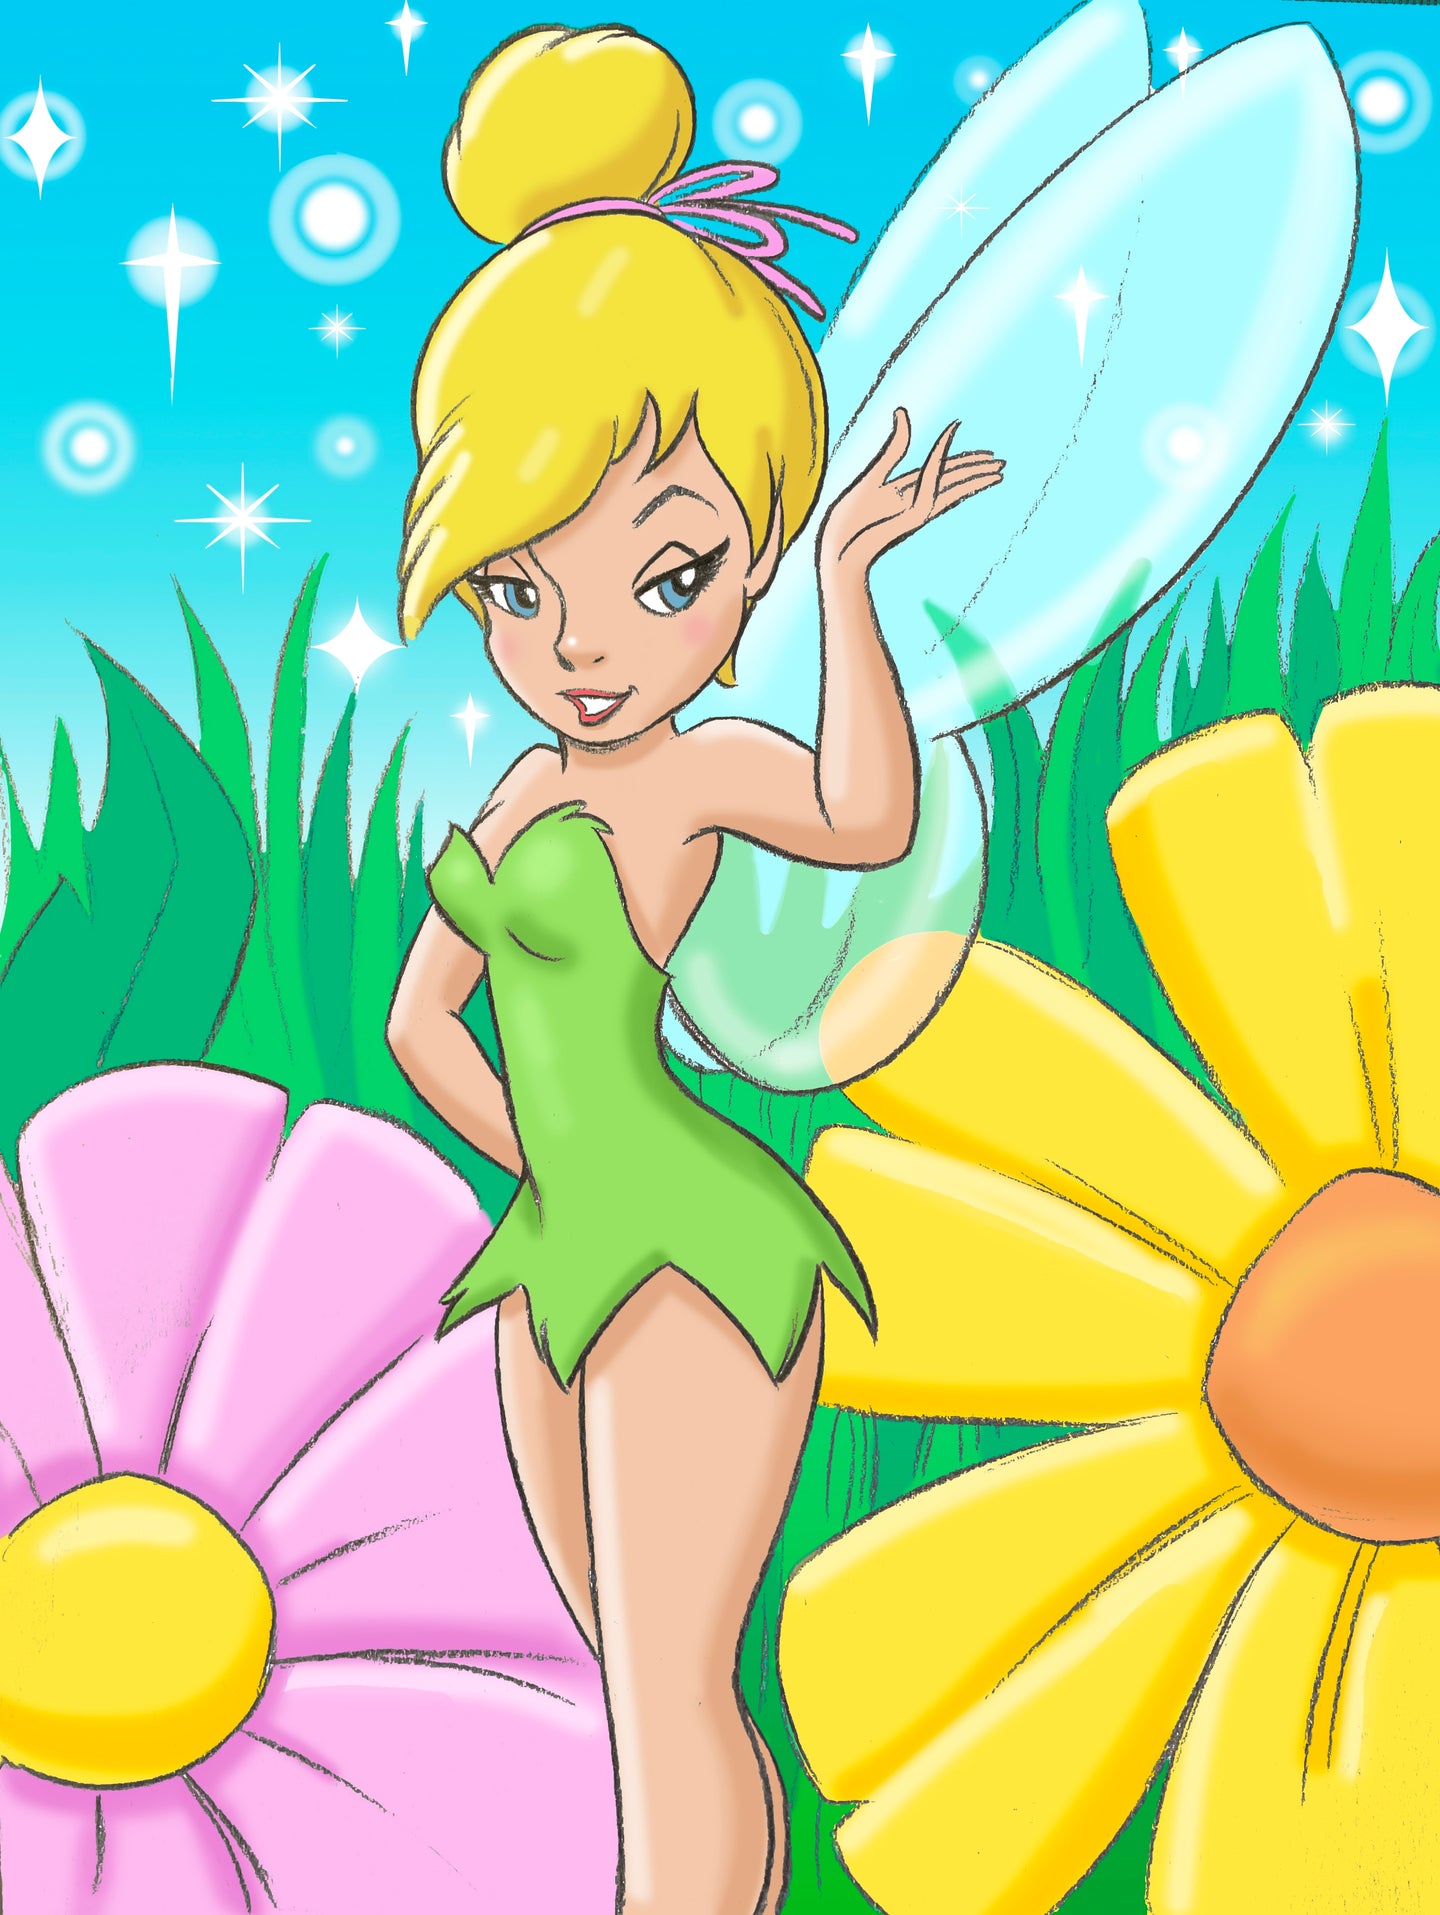 Disney's Tinker Bell Art Print - Created by Guy Gilchrist